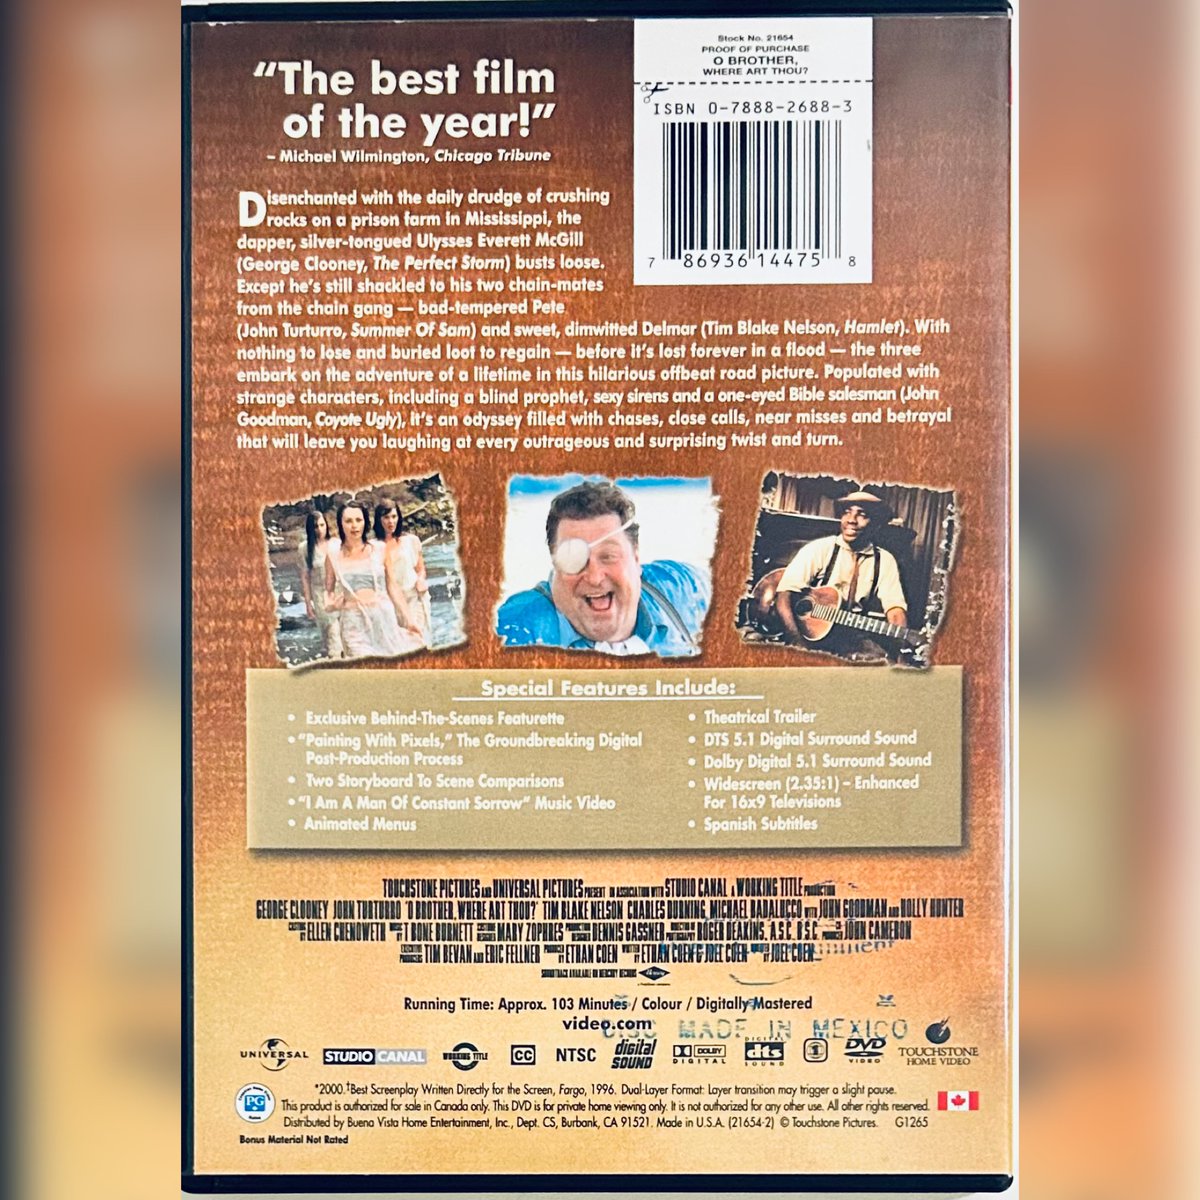 #ReStock! O Brother, Where Art Thou? (DVD, 2000) Comedy/Adventure Touchstone OOP

rareflicksplus.com/all-products/o…

#OBrotherWhereArtThou #2000s #ComedyMovie #AdventureMovie #TouchstonePictures #OOP #CoenBrothers #GeorgeClooney #JohnGoodman #DVD #DVDs #PhysicalMedia